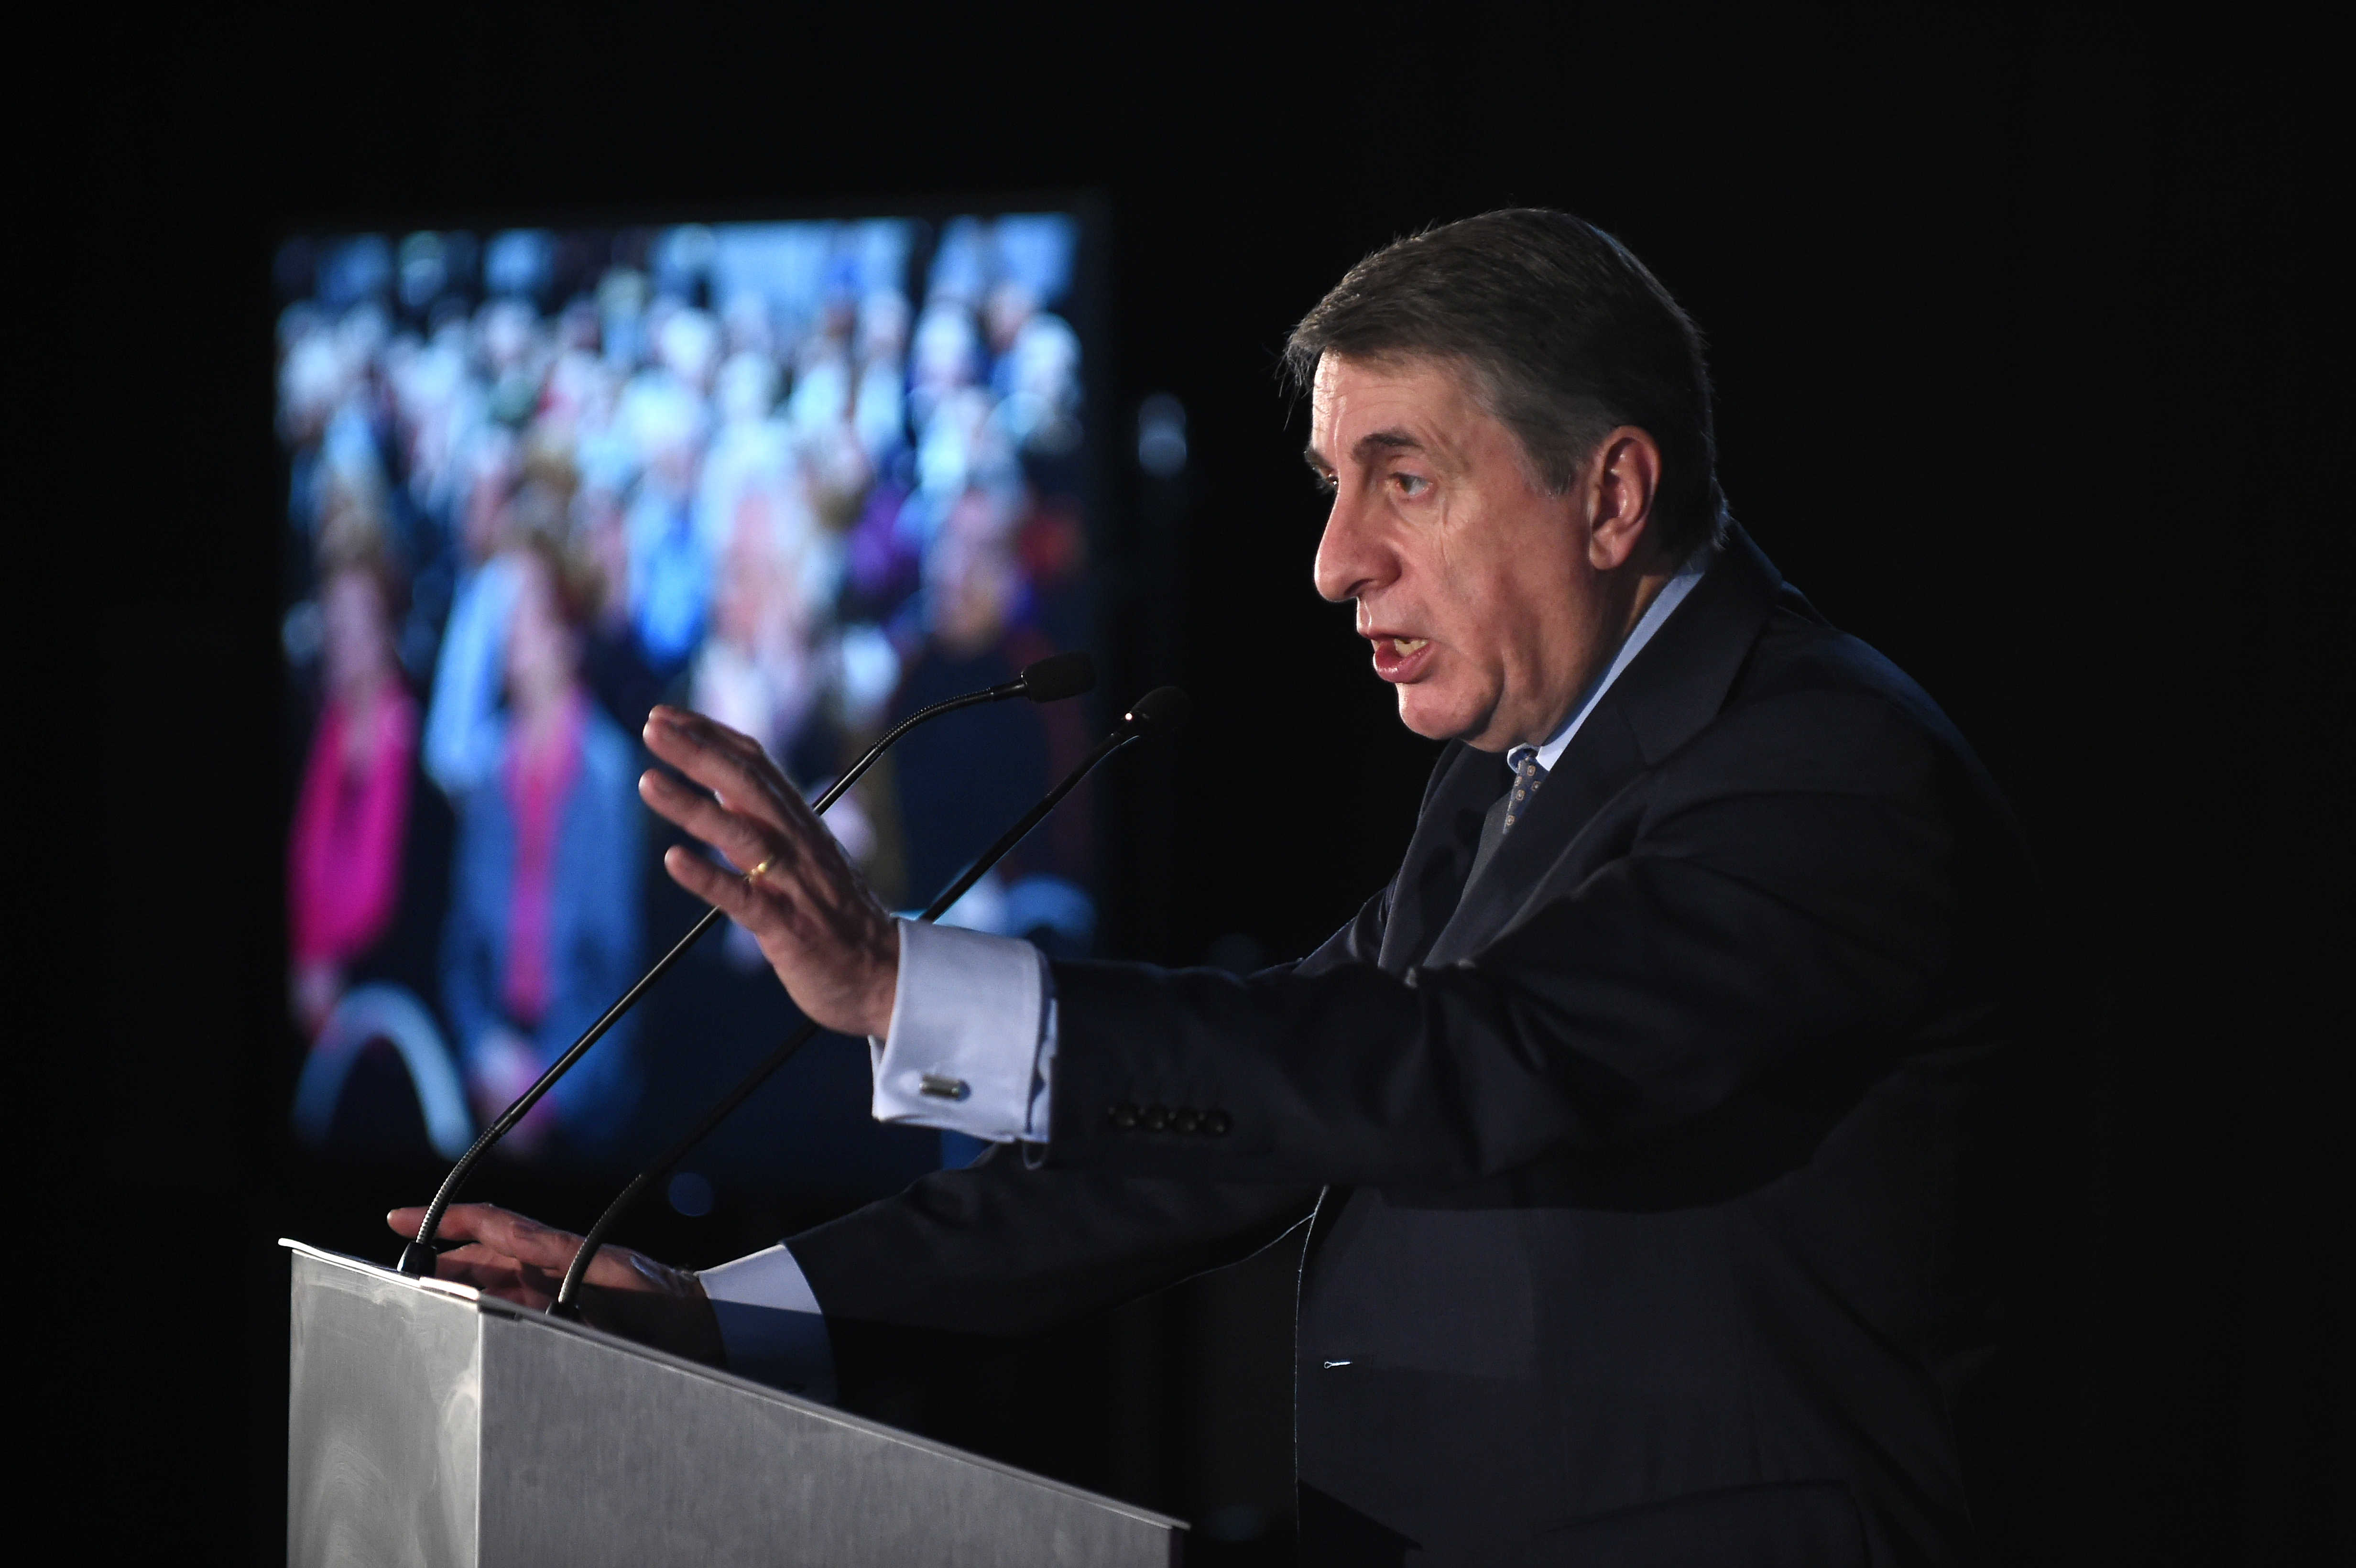 DeFI chairman Olivier Maingain delivers a speech at the new year's reception of frenchspeaking party Defi, Sunday 27 January 2019 in Perwez. (JOHN THYS/AFP/Getty Images)